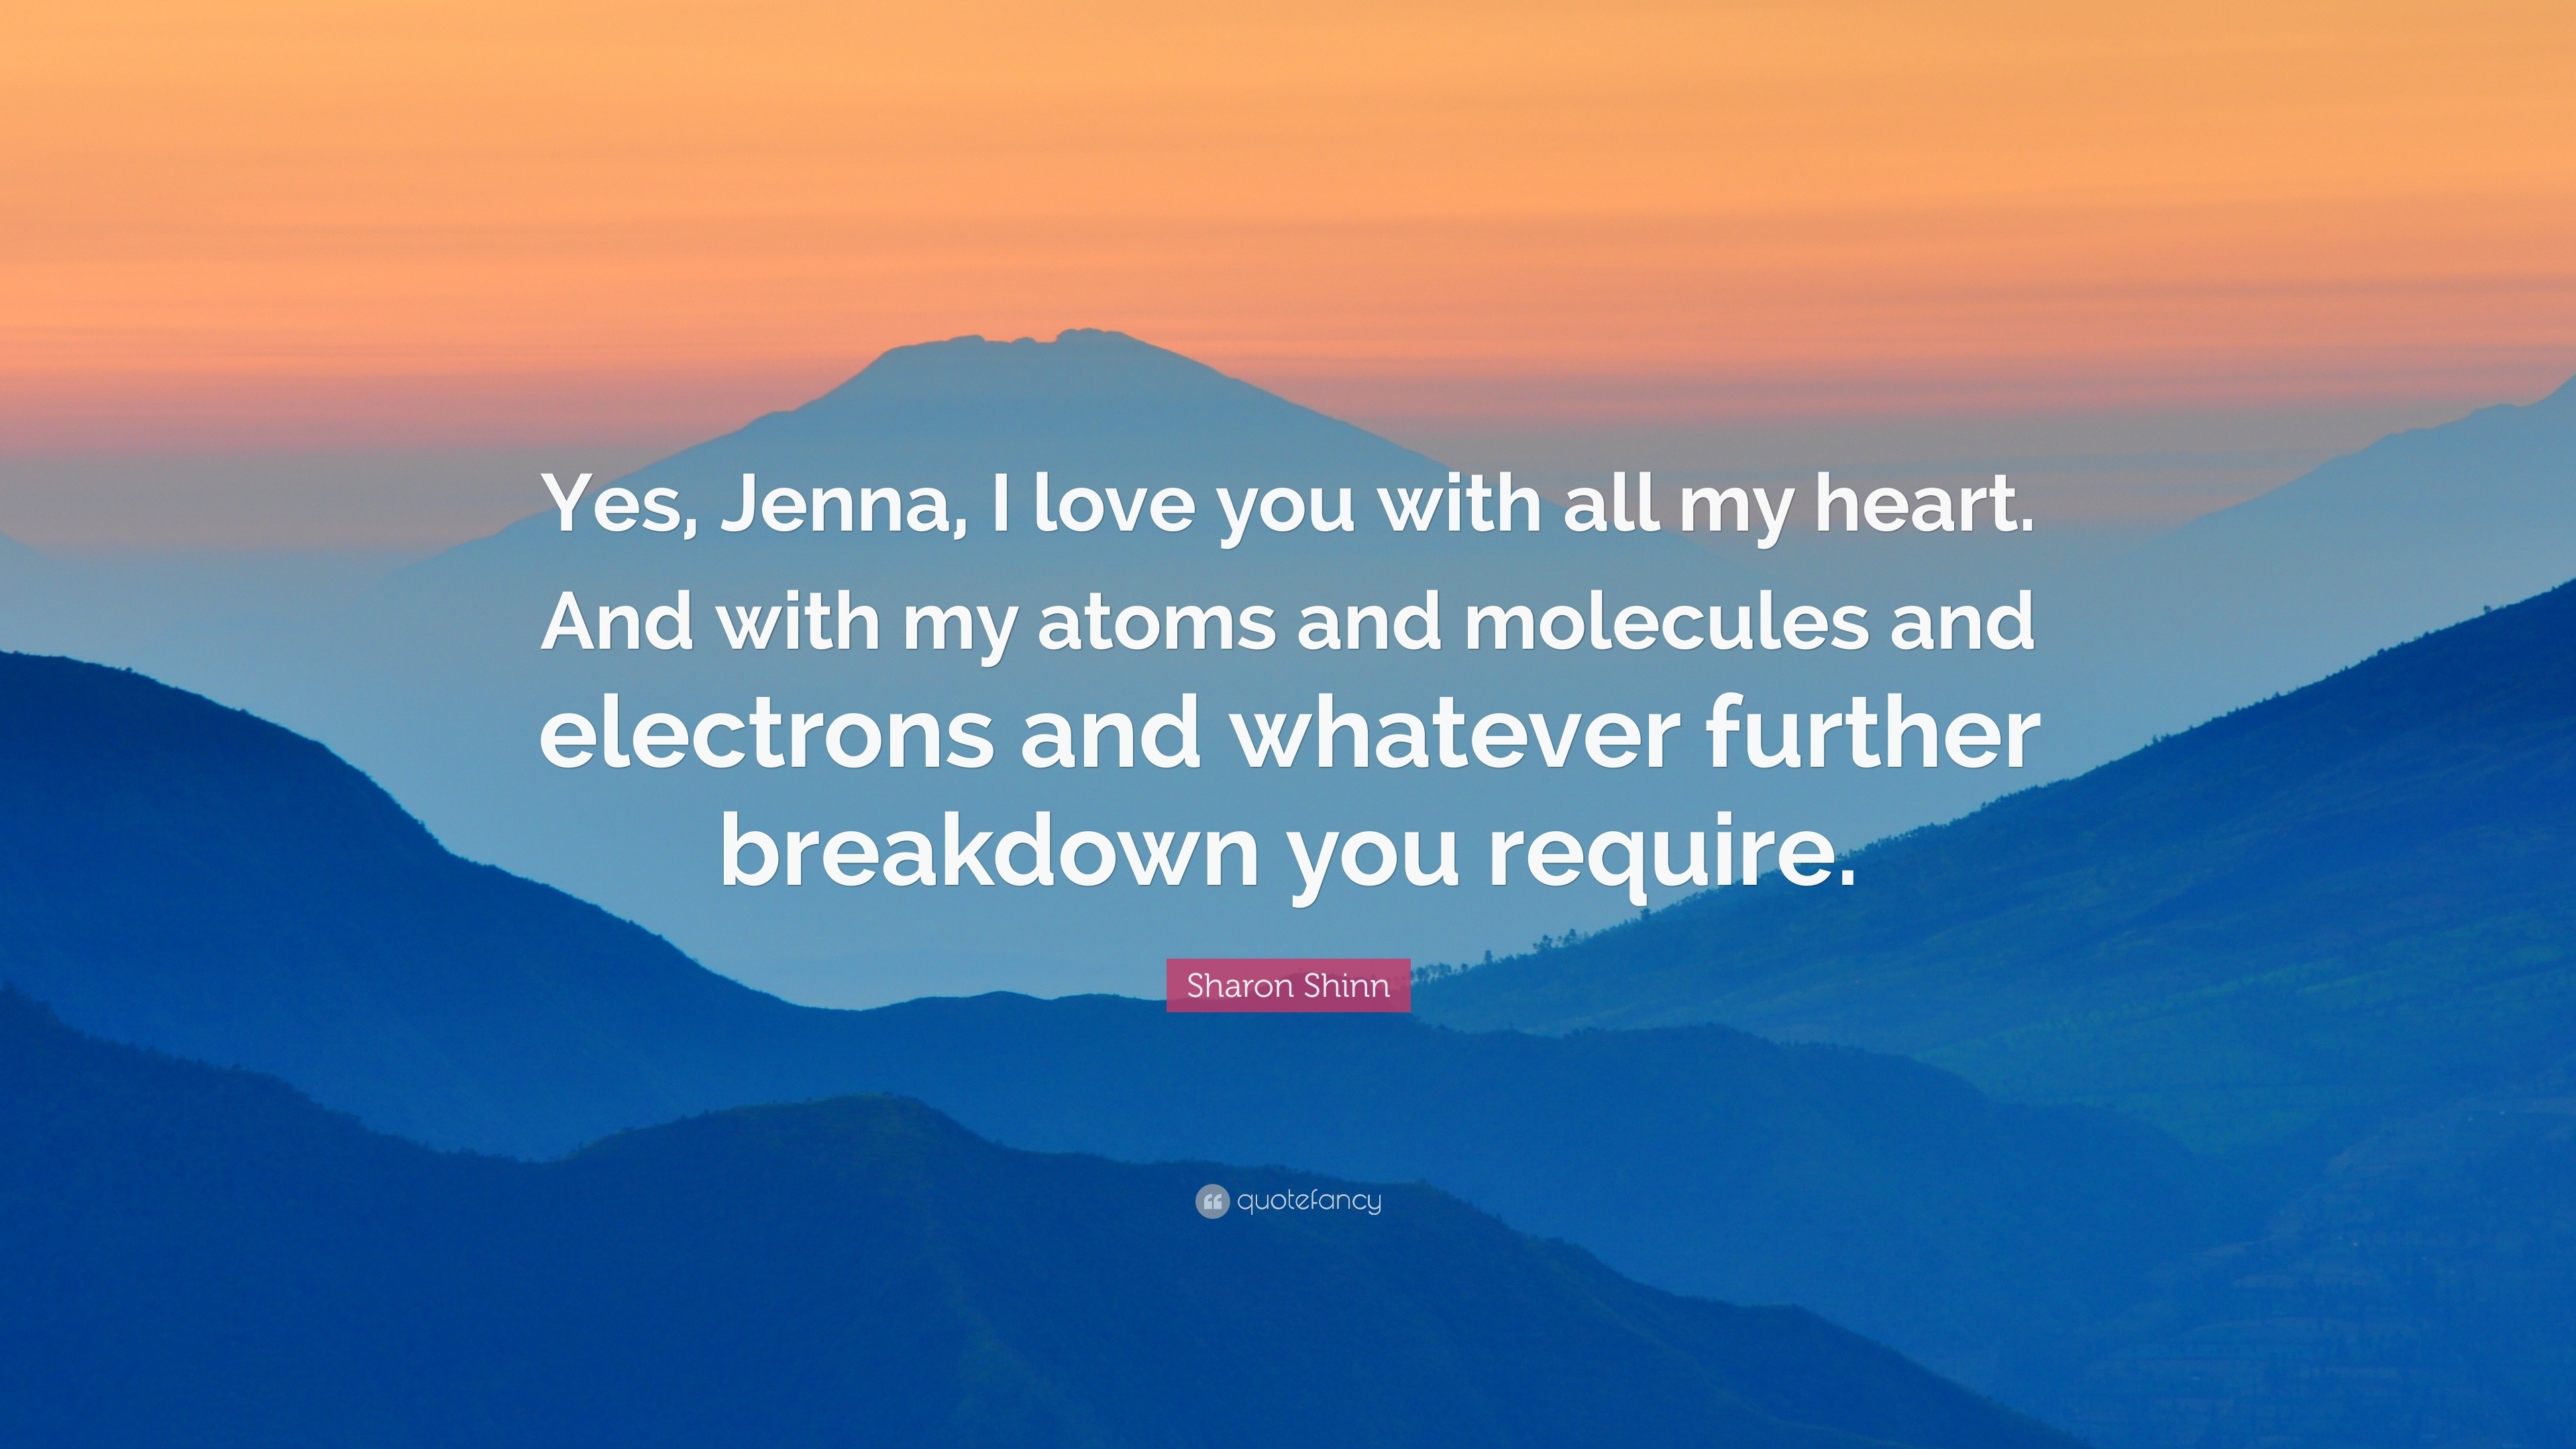 Sharon Shinn Quote “Yes Jenna I love you with all my heart